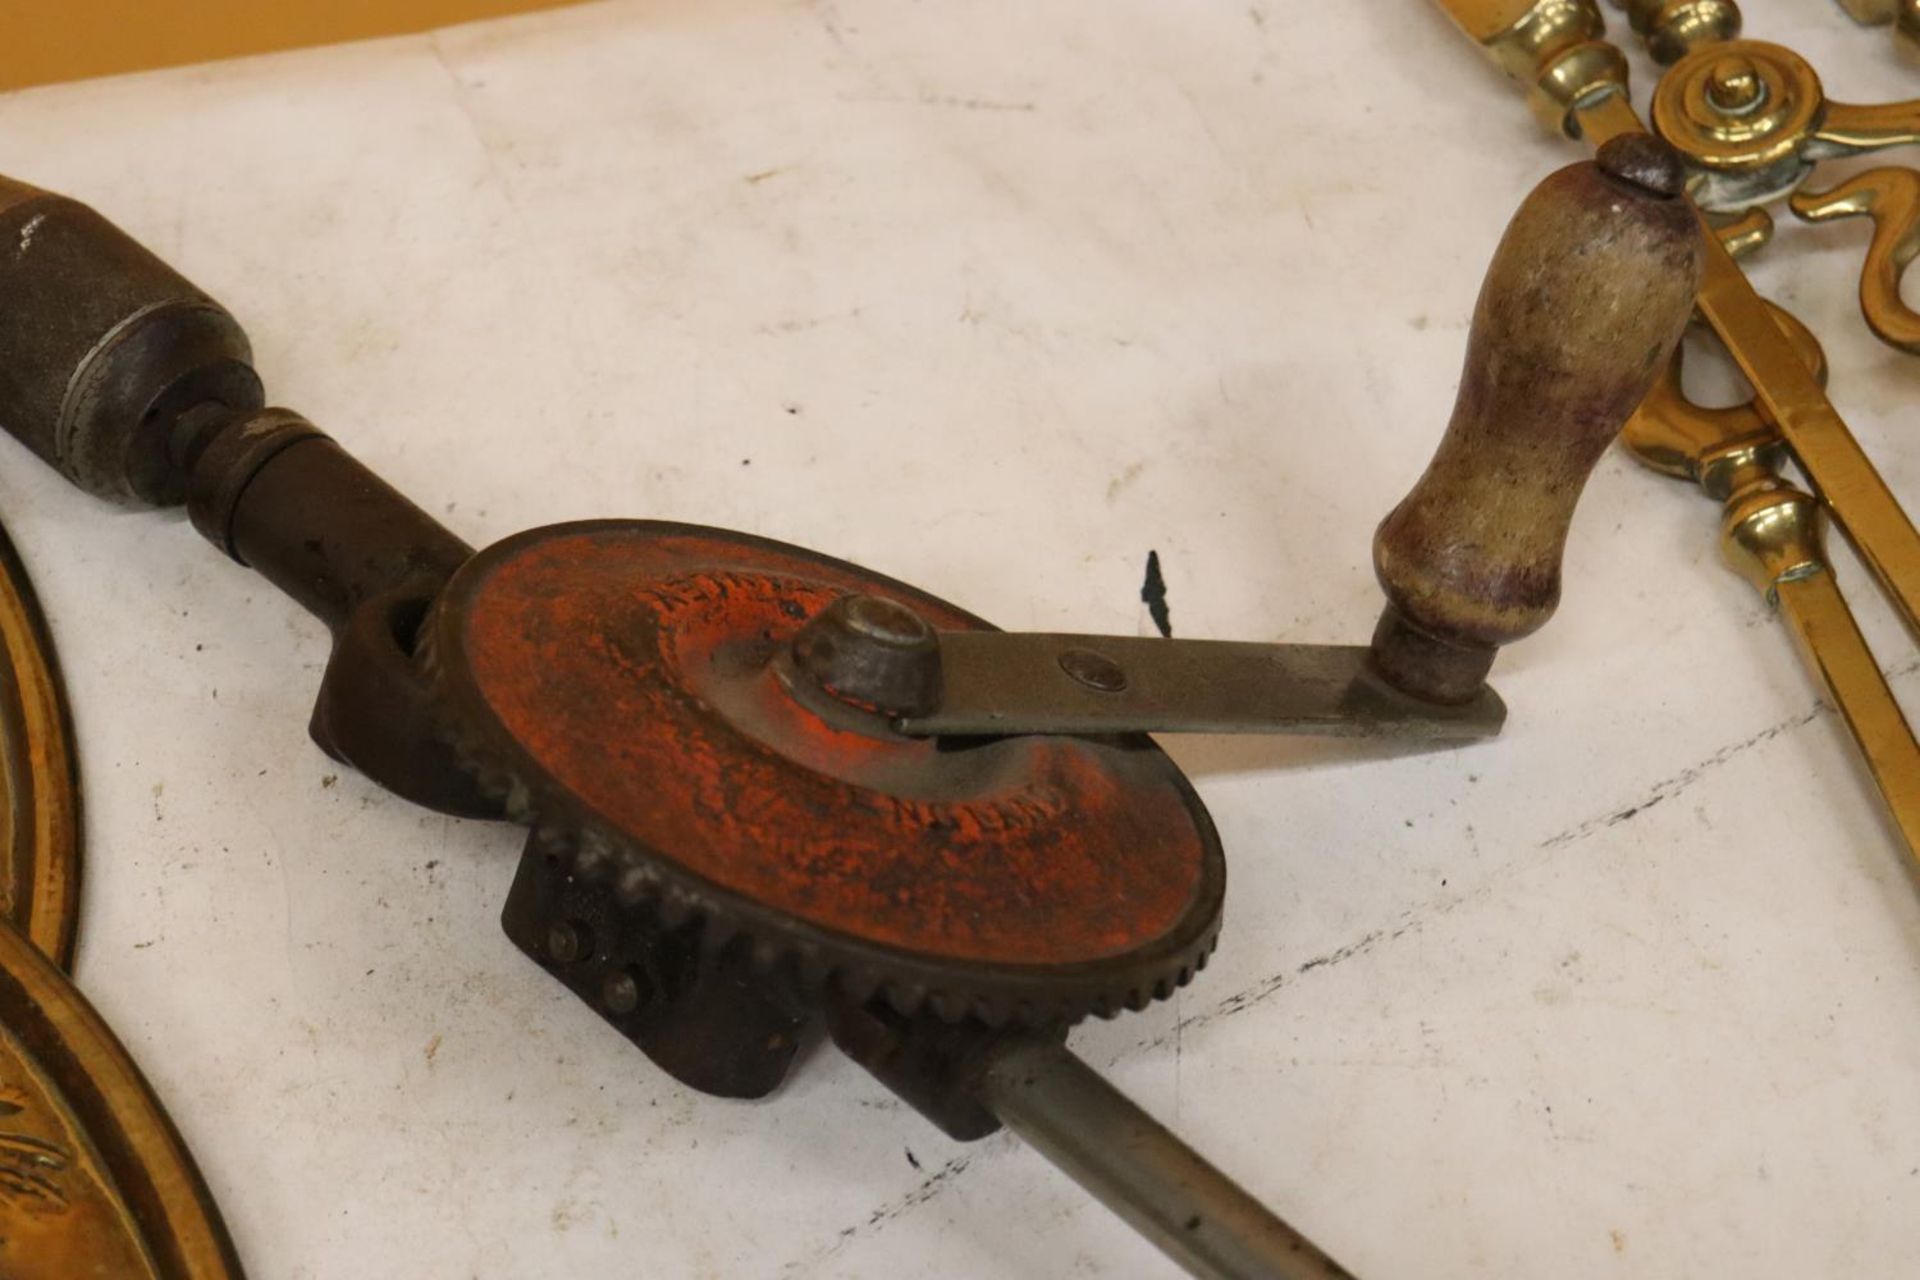 A VINTAGE STANLEY HAND DRILL - Image 3 of 4